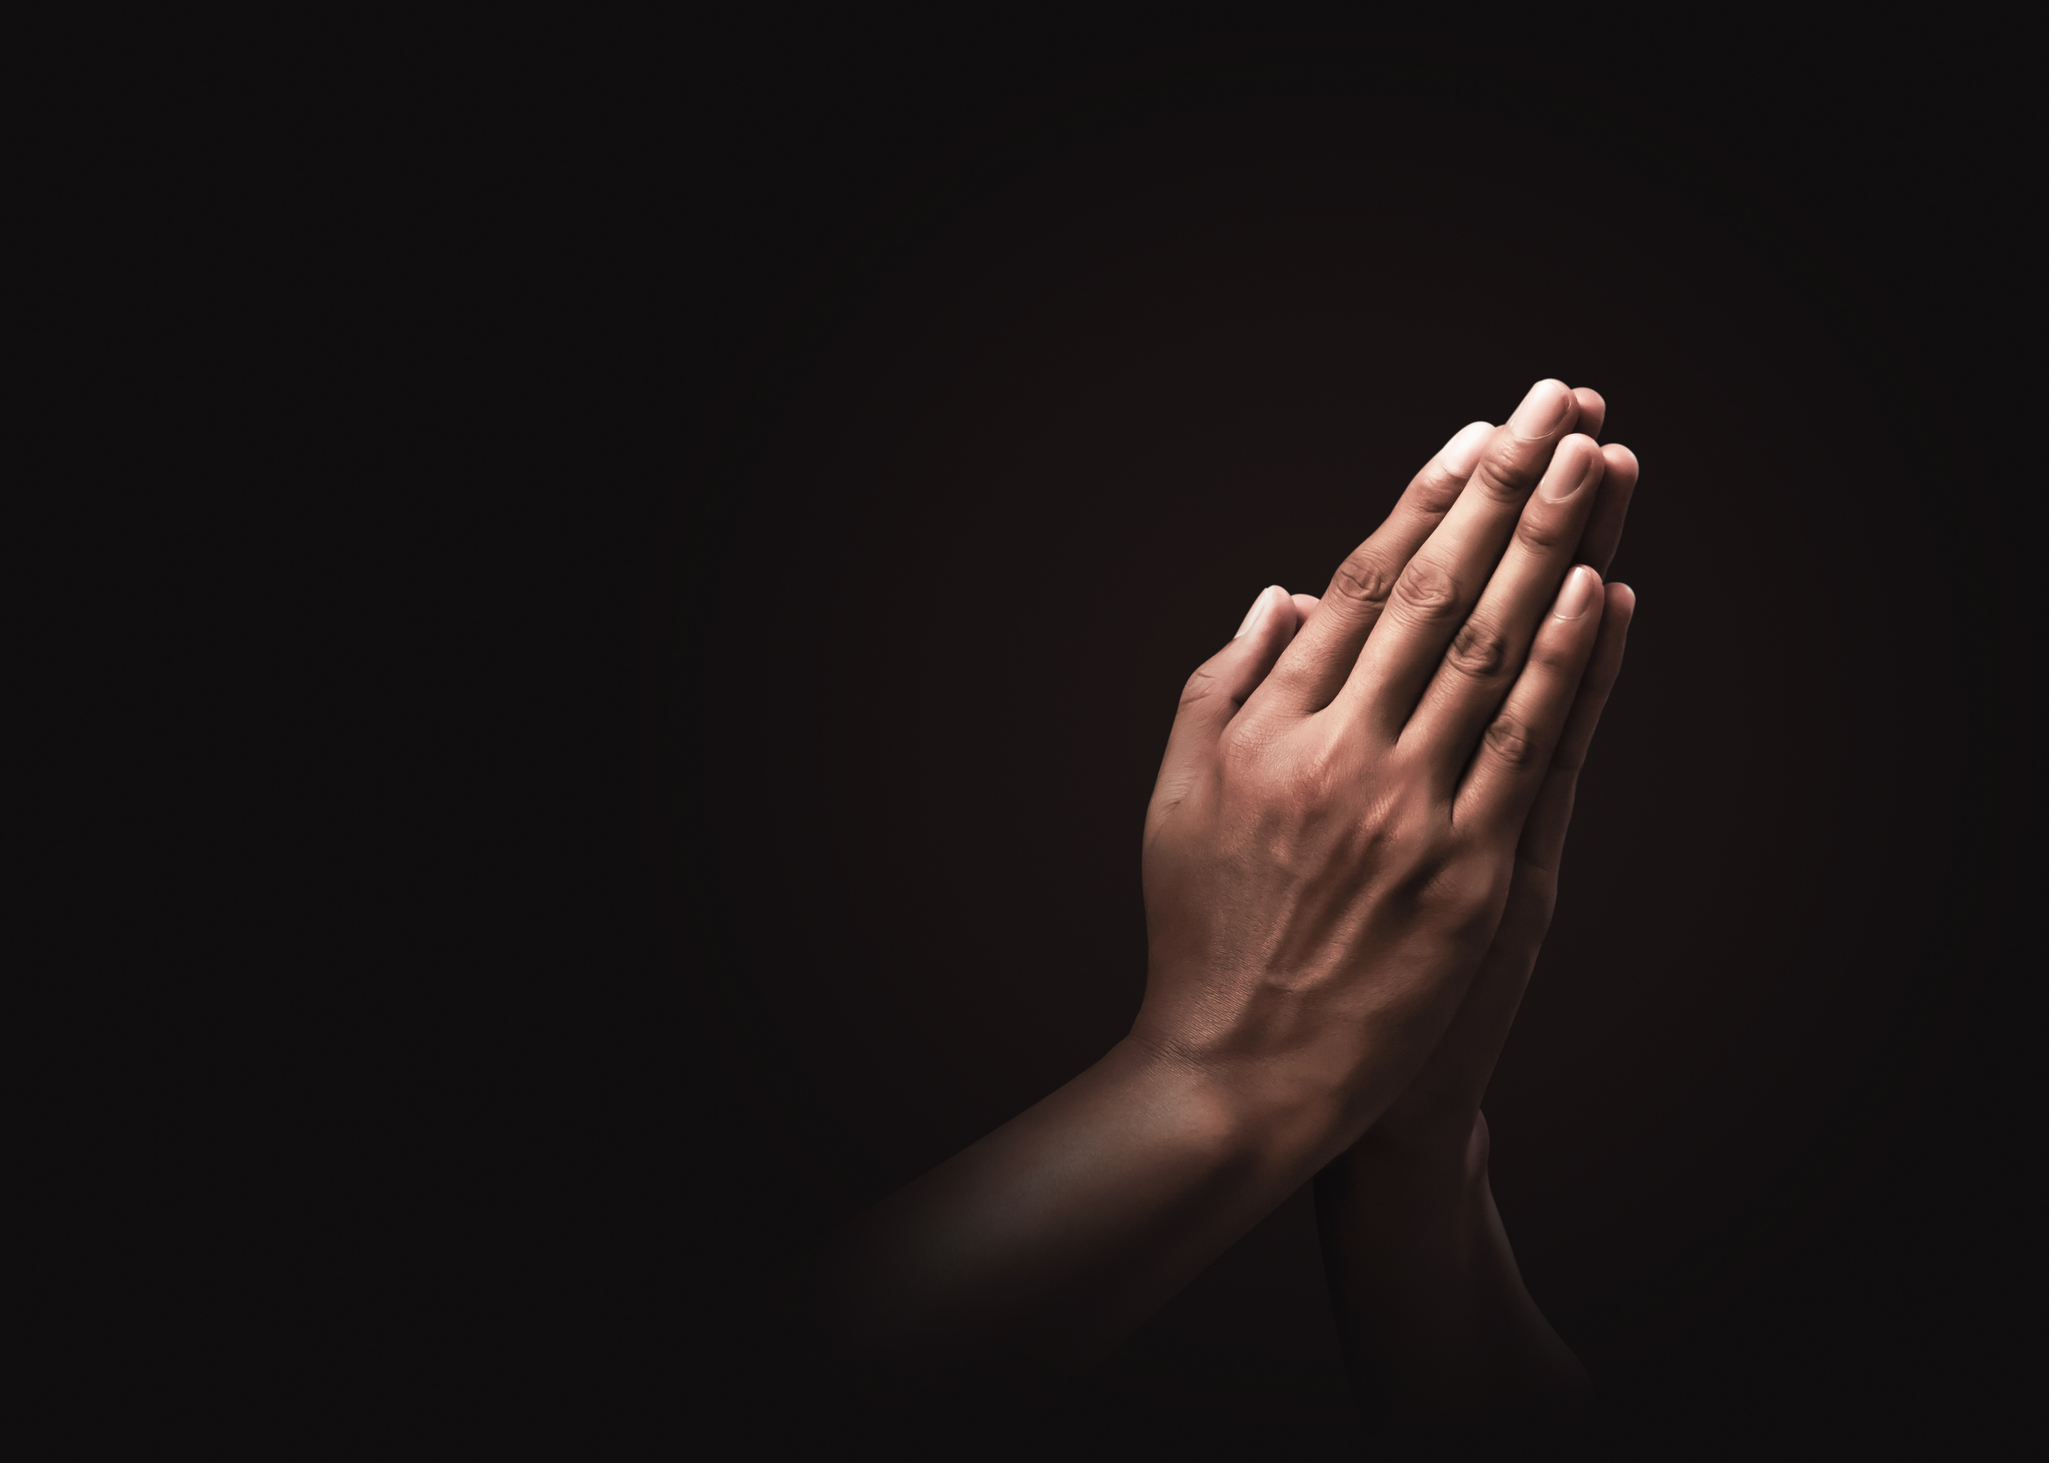 Praying hands with faith in religion and belief in God on dark background. 